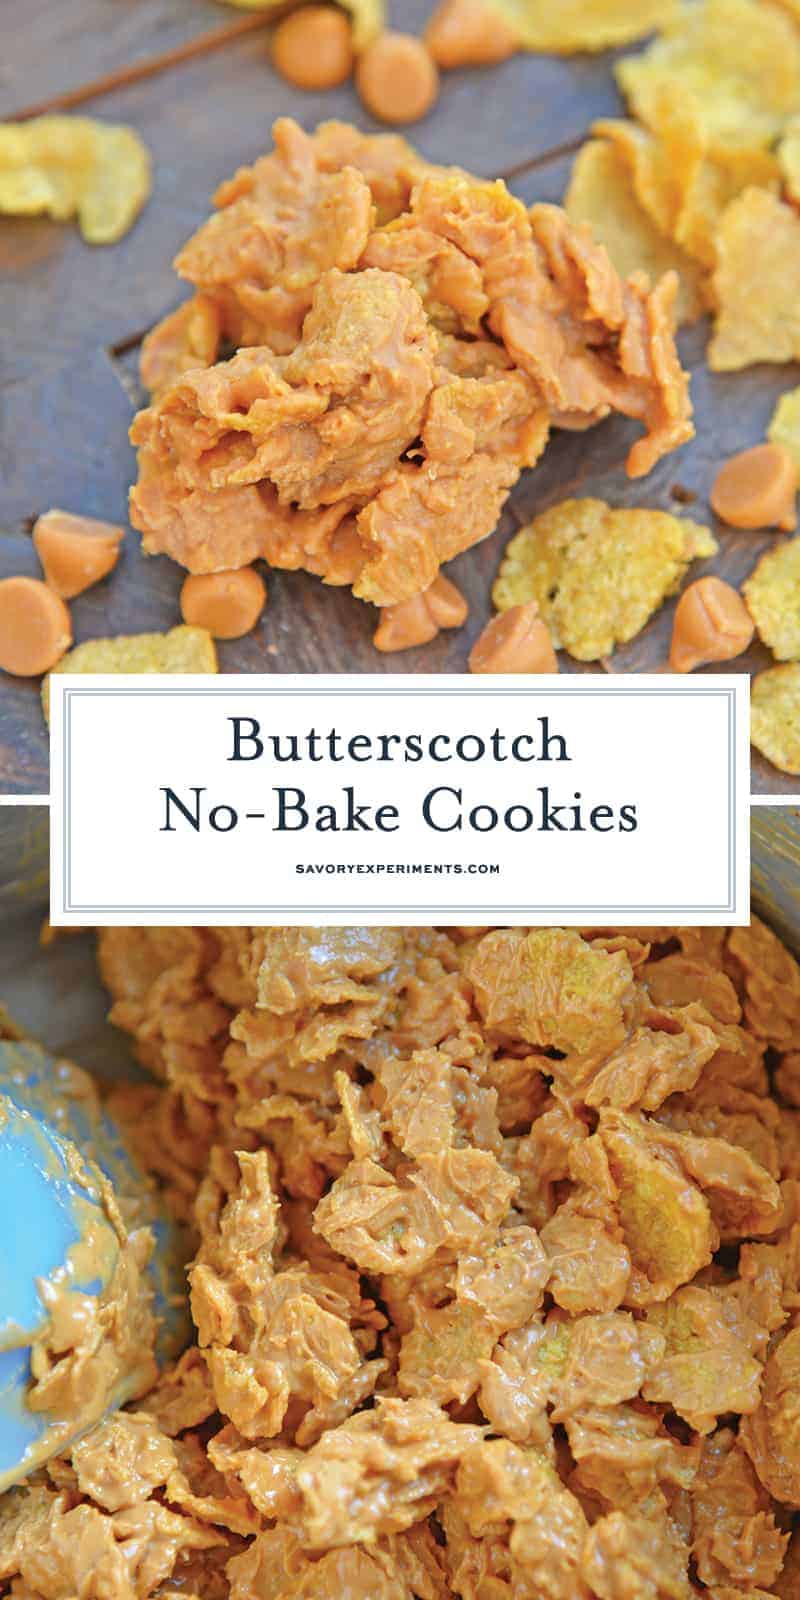 Butterscotch No-Bake Cookies are a simple 3 ingredient no bake cookie recipe. A quick and easy butterscotch cookie recipe everyone loves! #butterscotchcookies #nobakecookies www.savoryexperiments.com